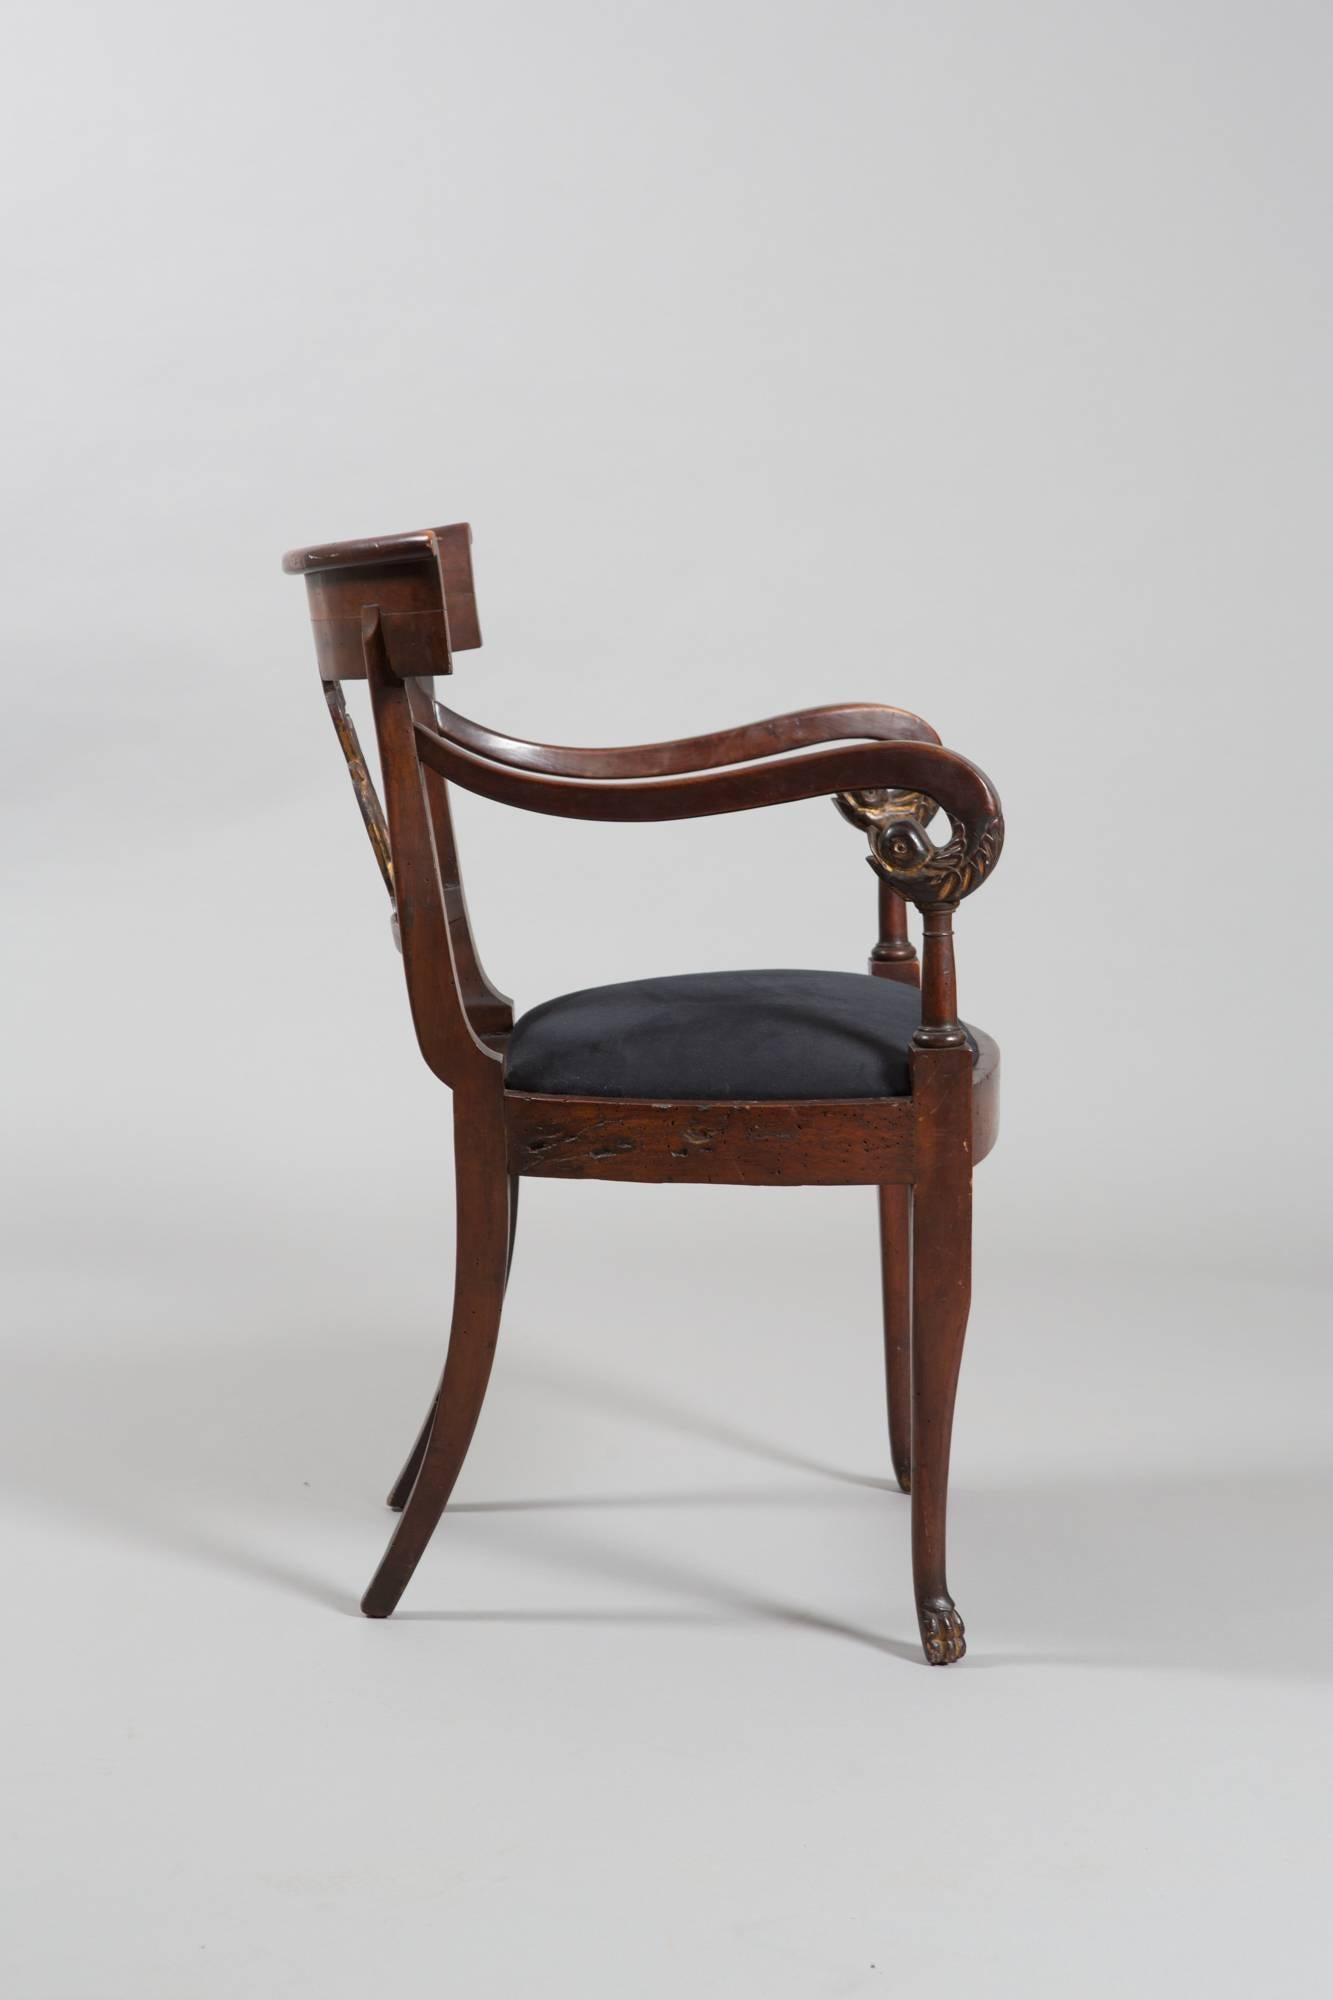 Beautifully carved Directoire style armchair with gilded details on arms, feet and back. Carved backrest with carved swan detail. Very handsome piece!
Measures: 18